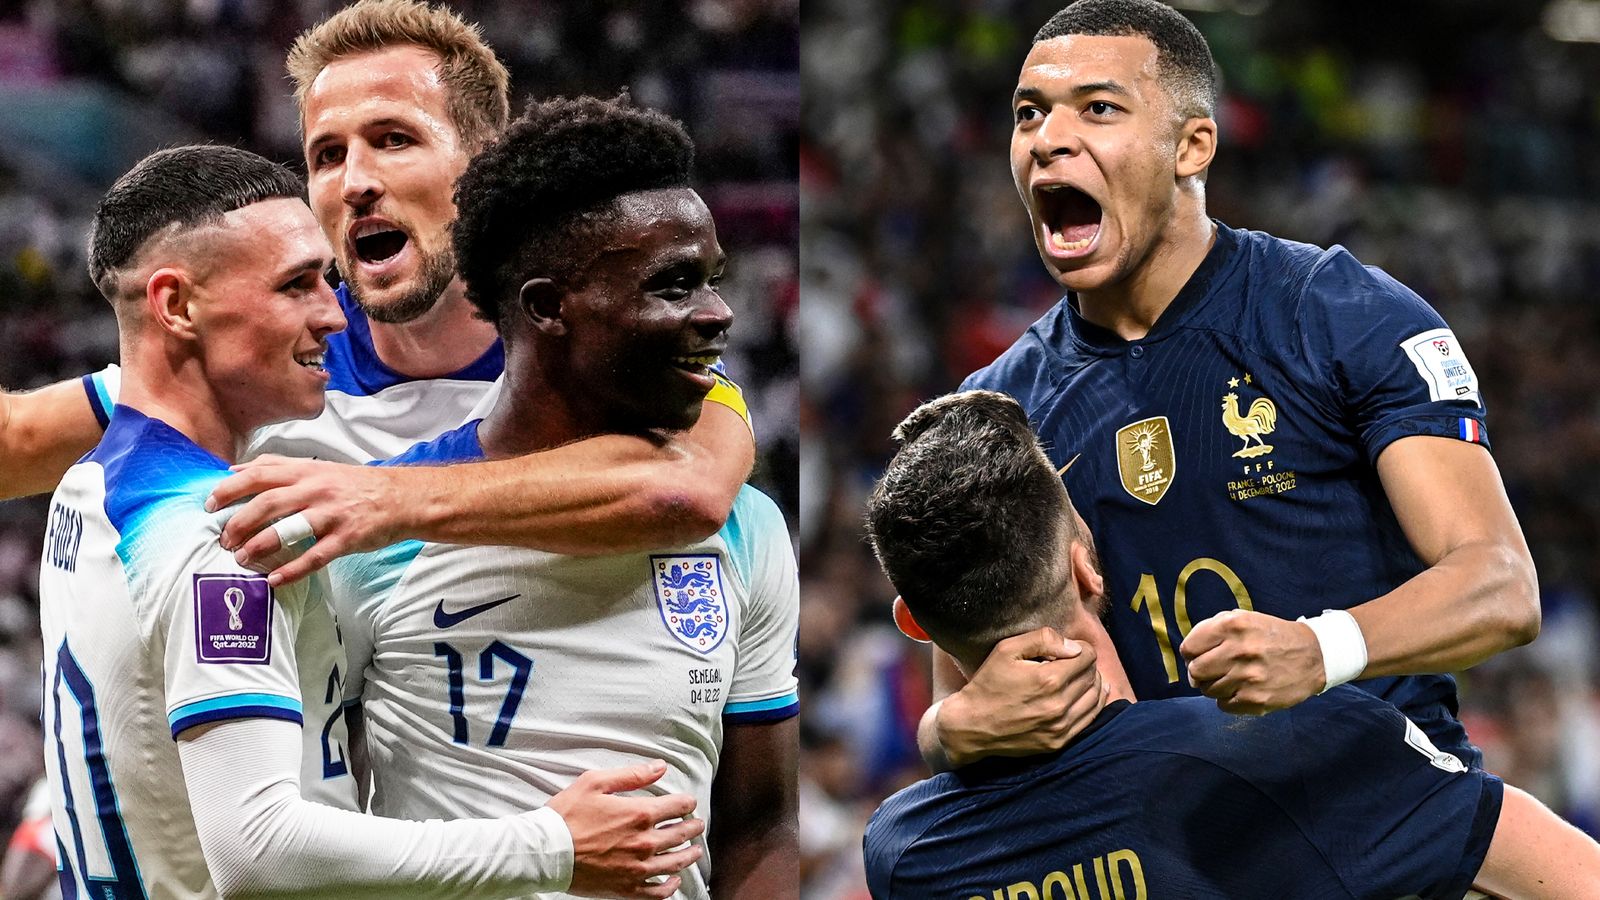 Gary Neville: England vs France on a Saturday night at a World Cup is a game of a lifetime